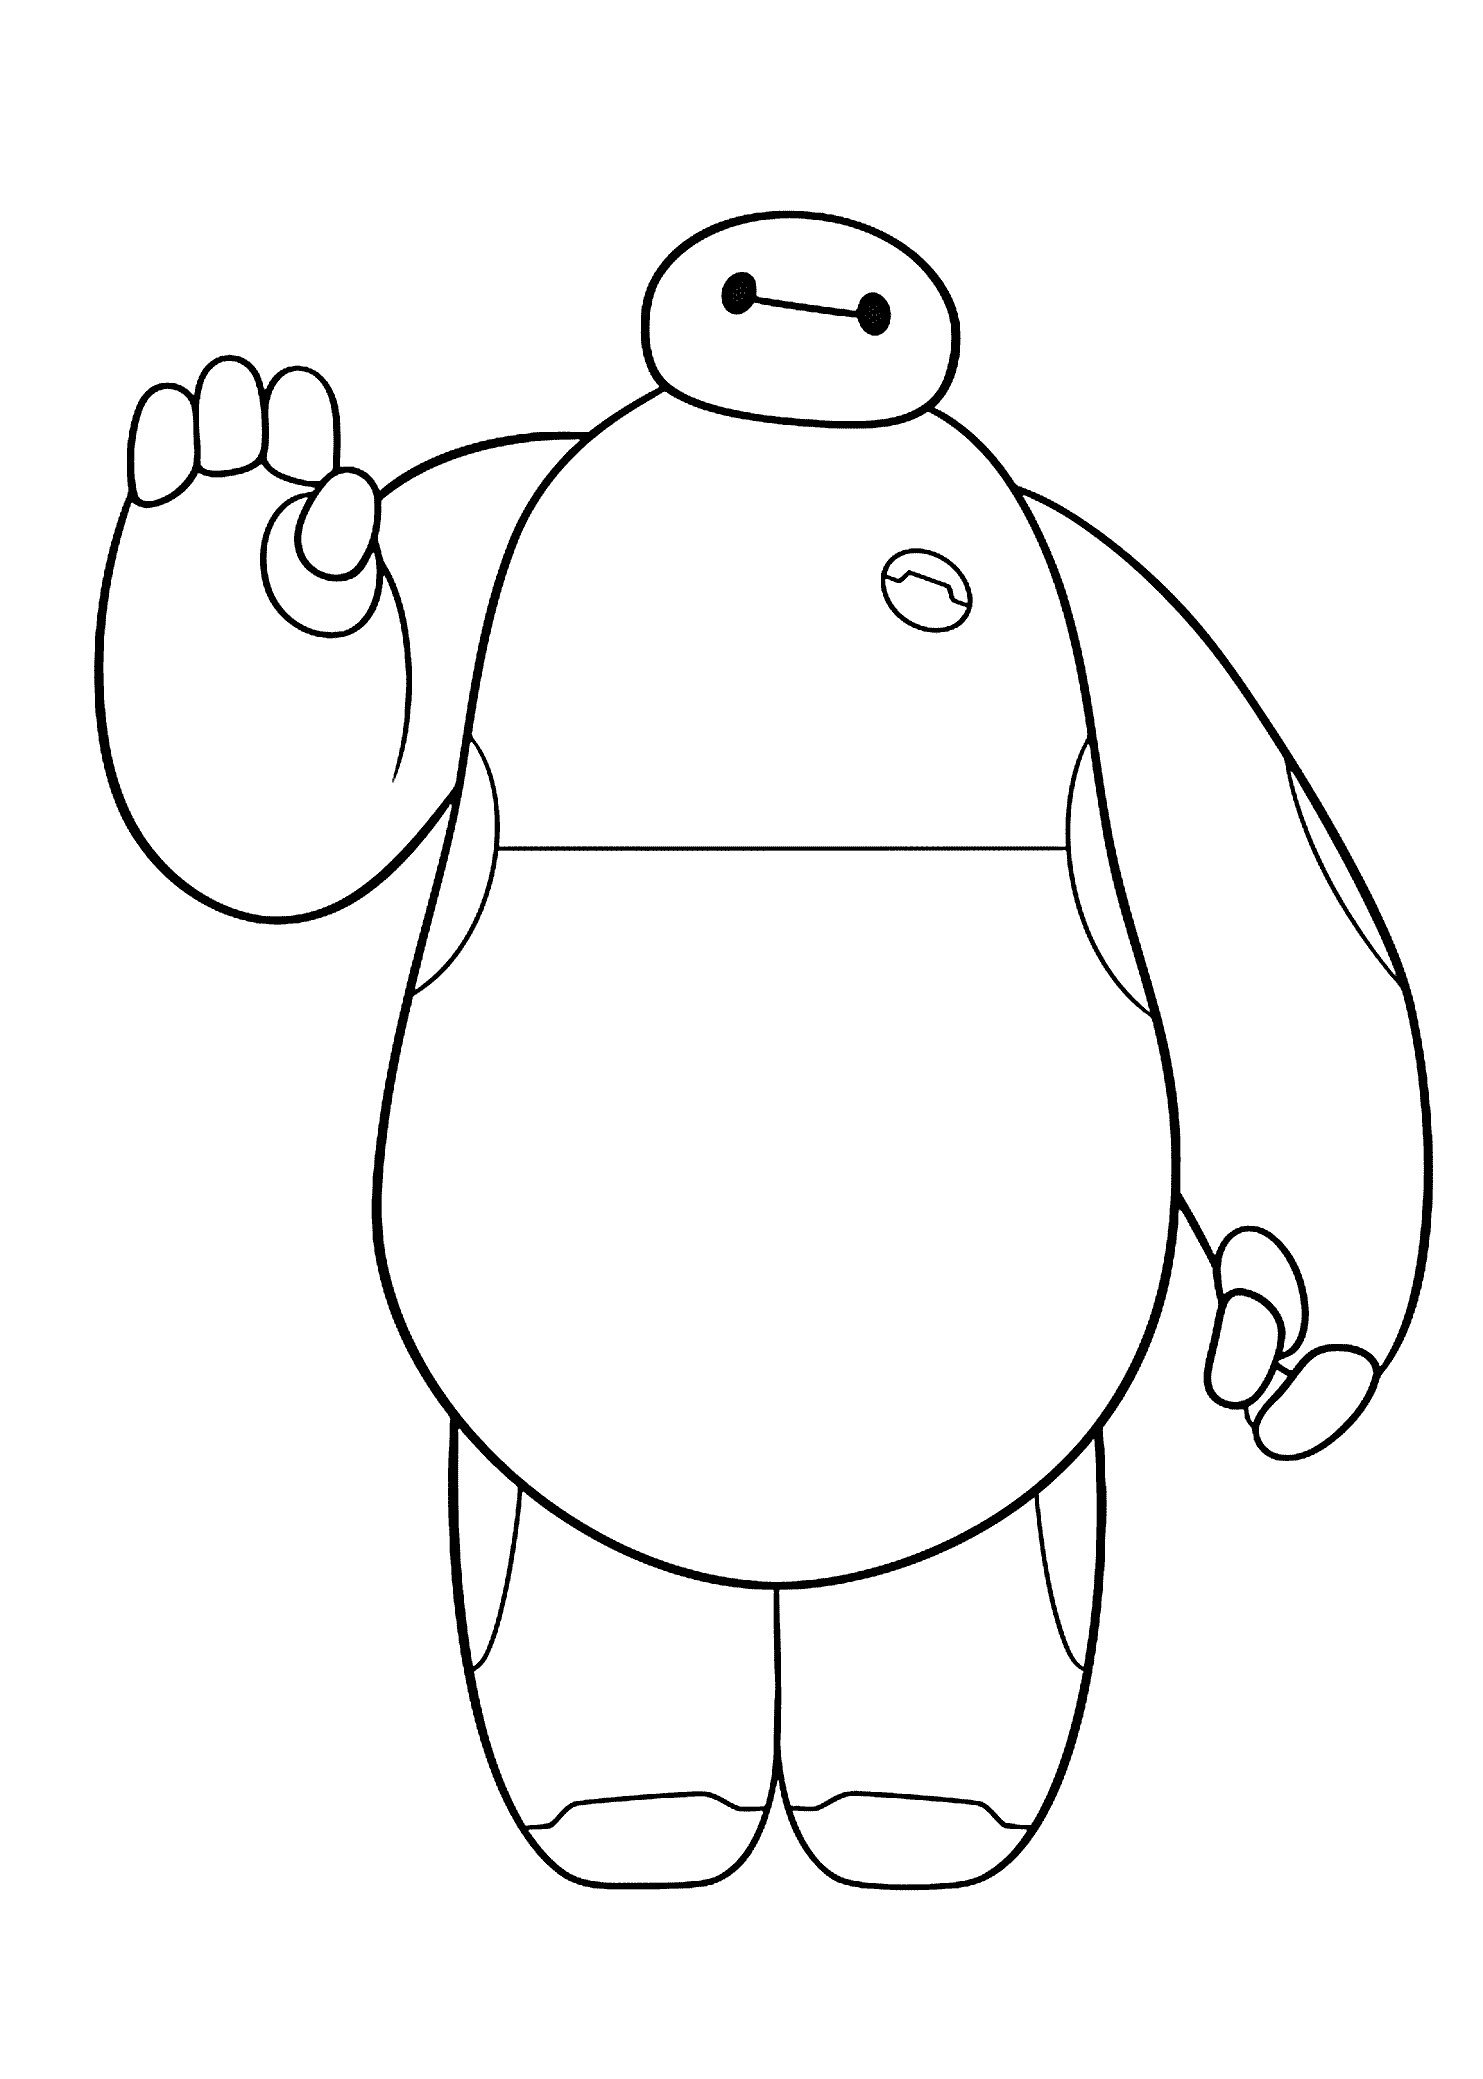 Big hero 6 coloring pages to download and print for free